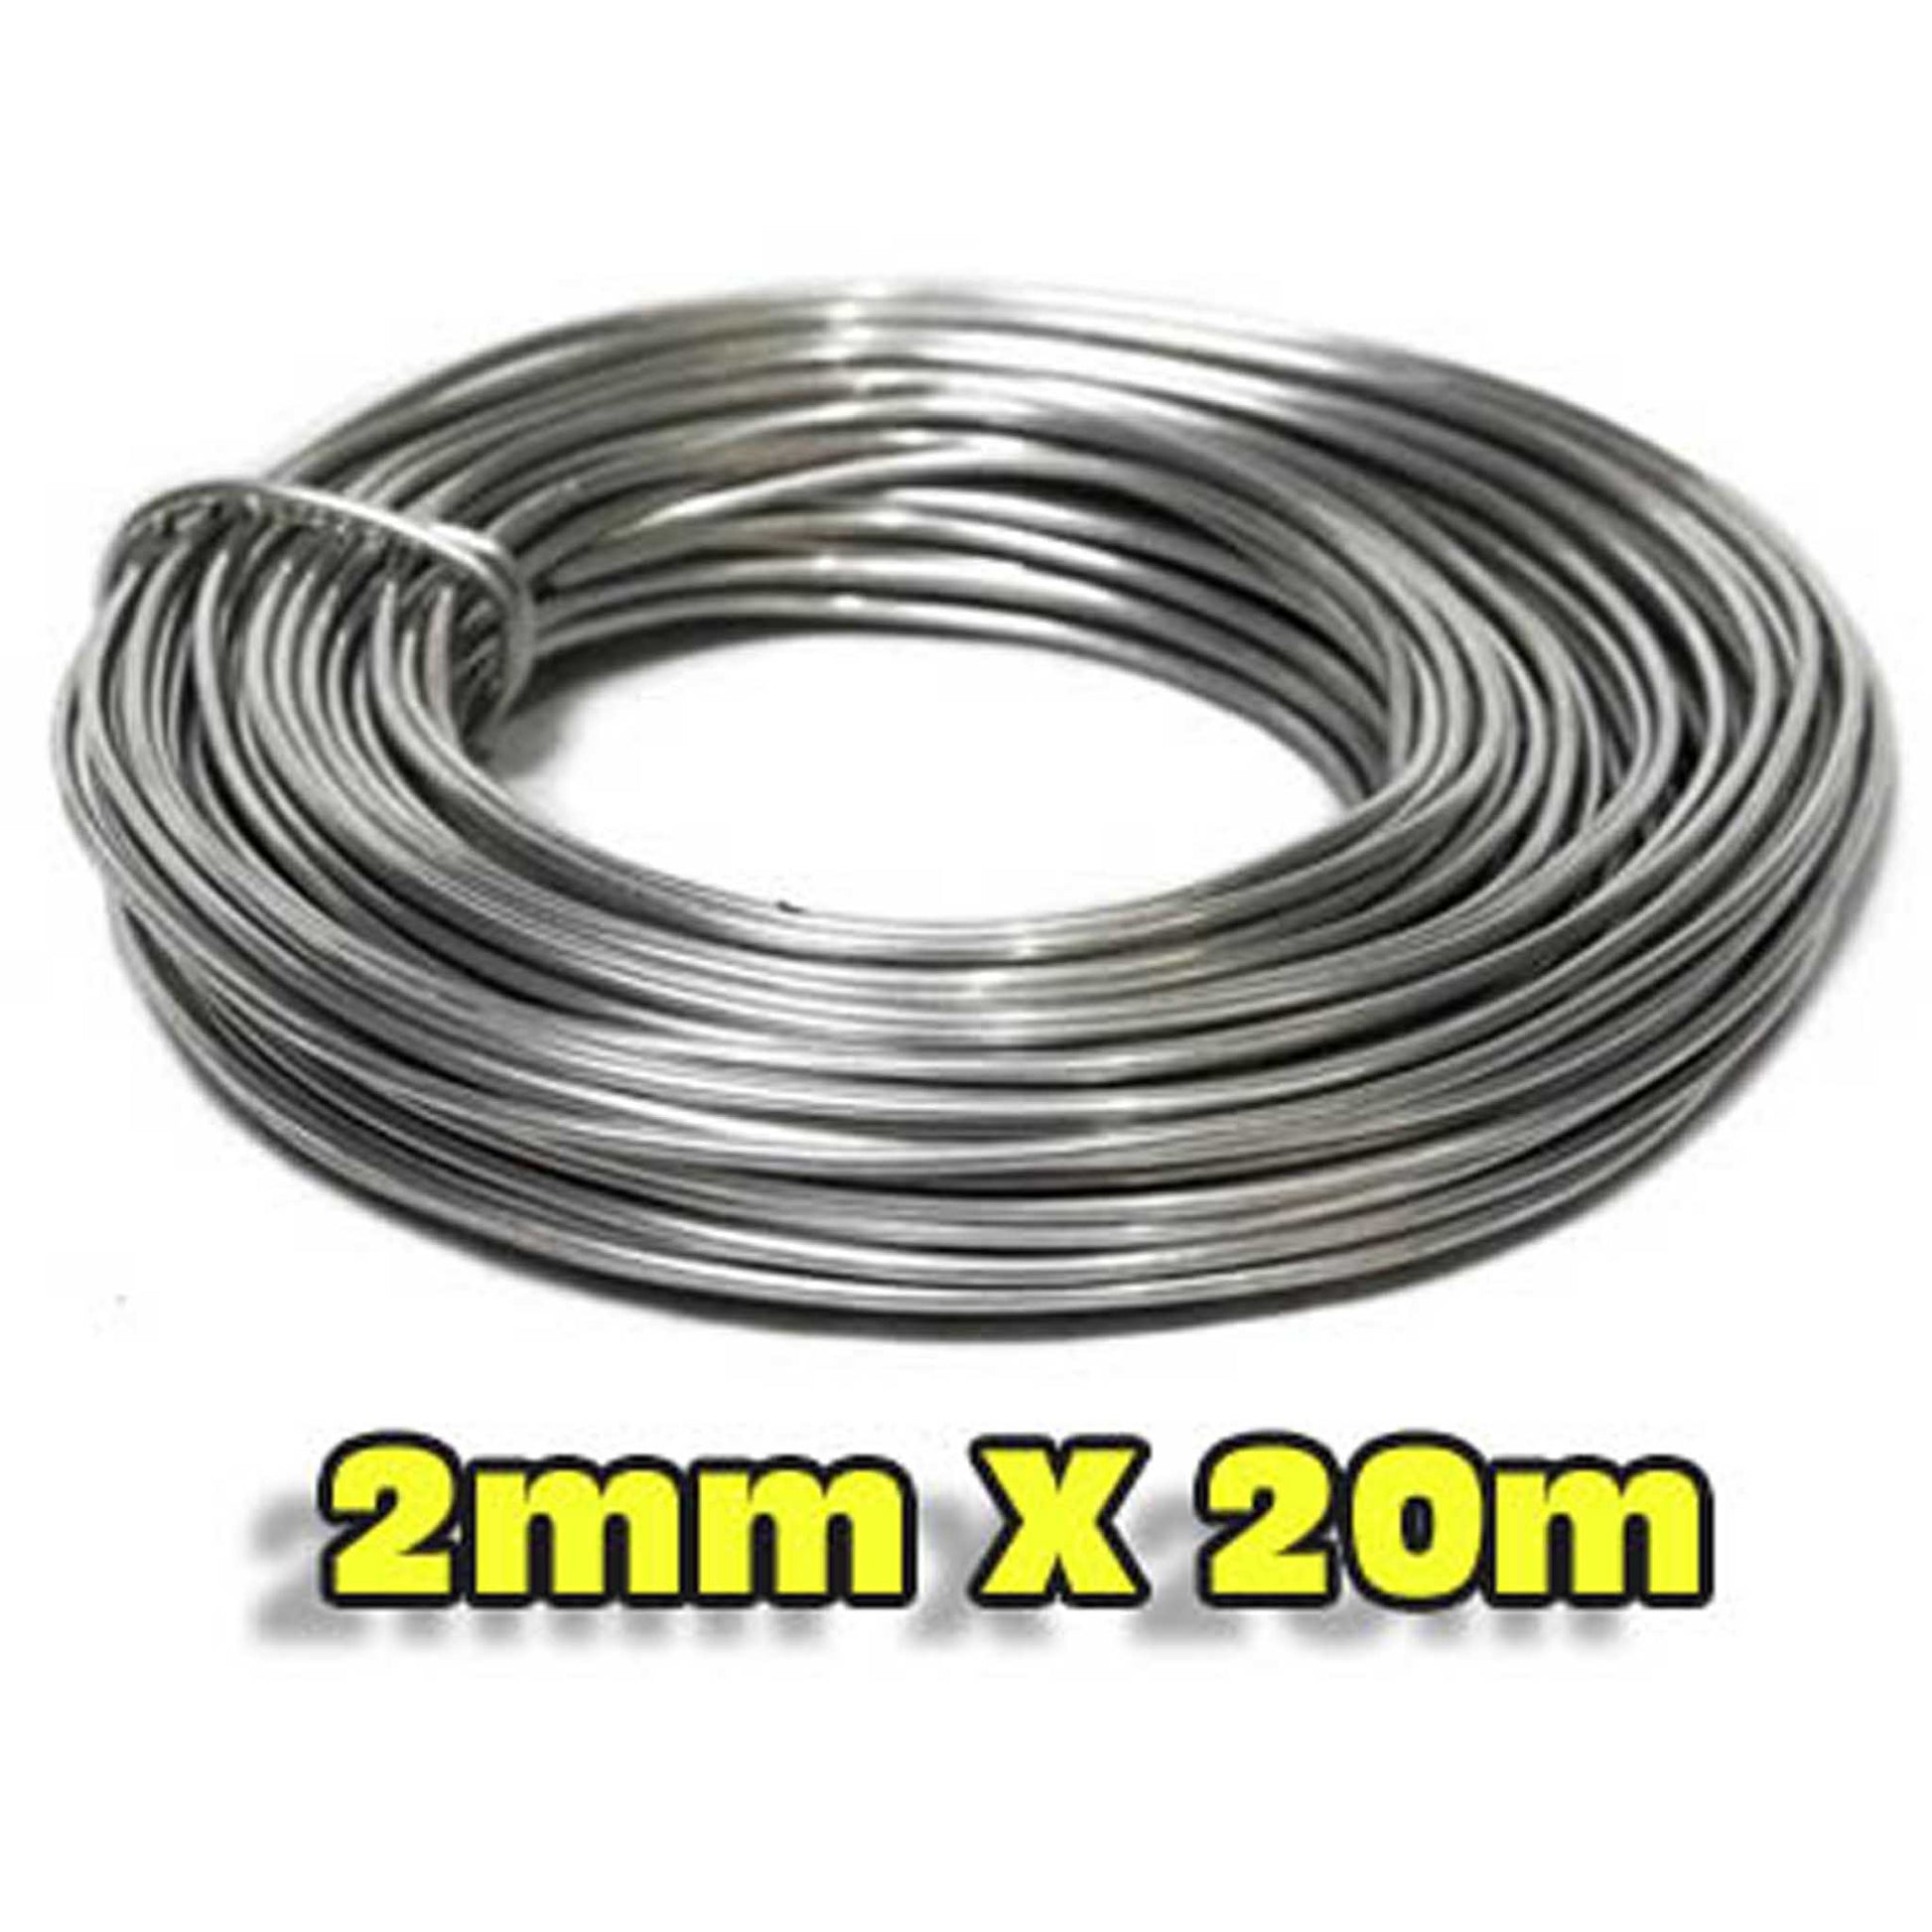 A 2mm by 20m spool of annealed aluminum craft wire for stop motion armatures.